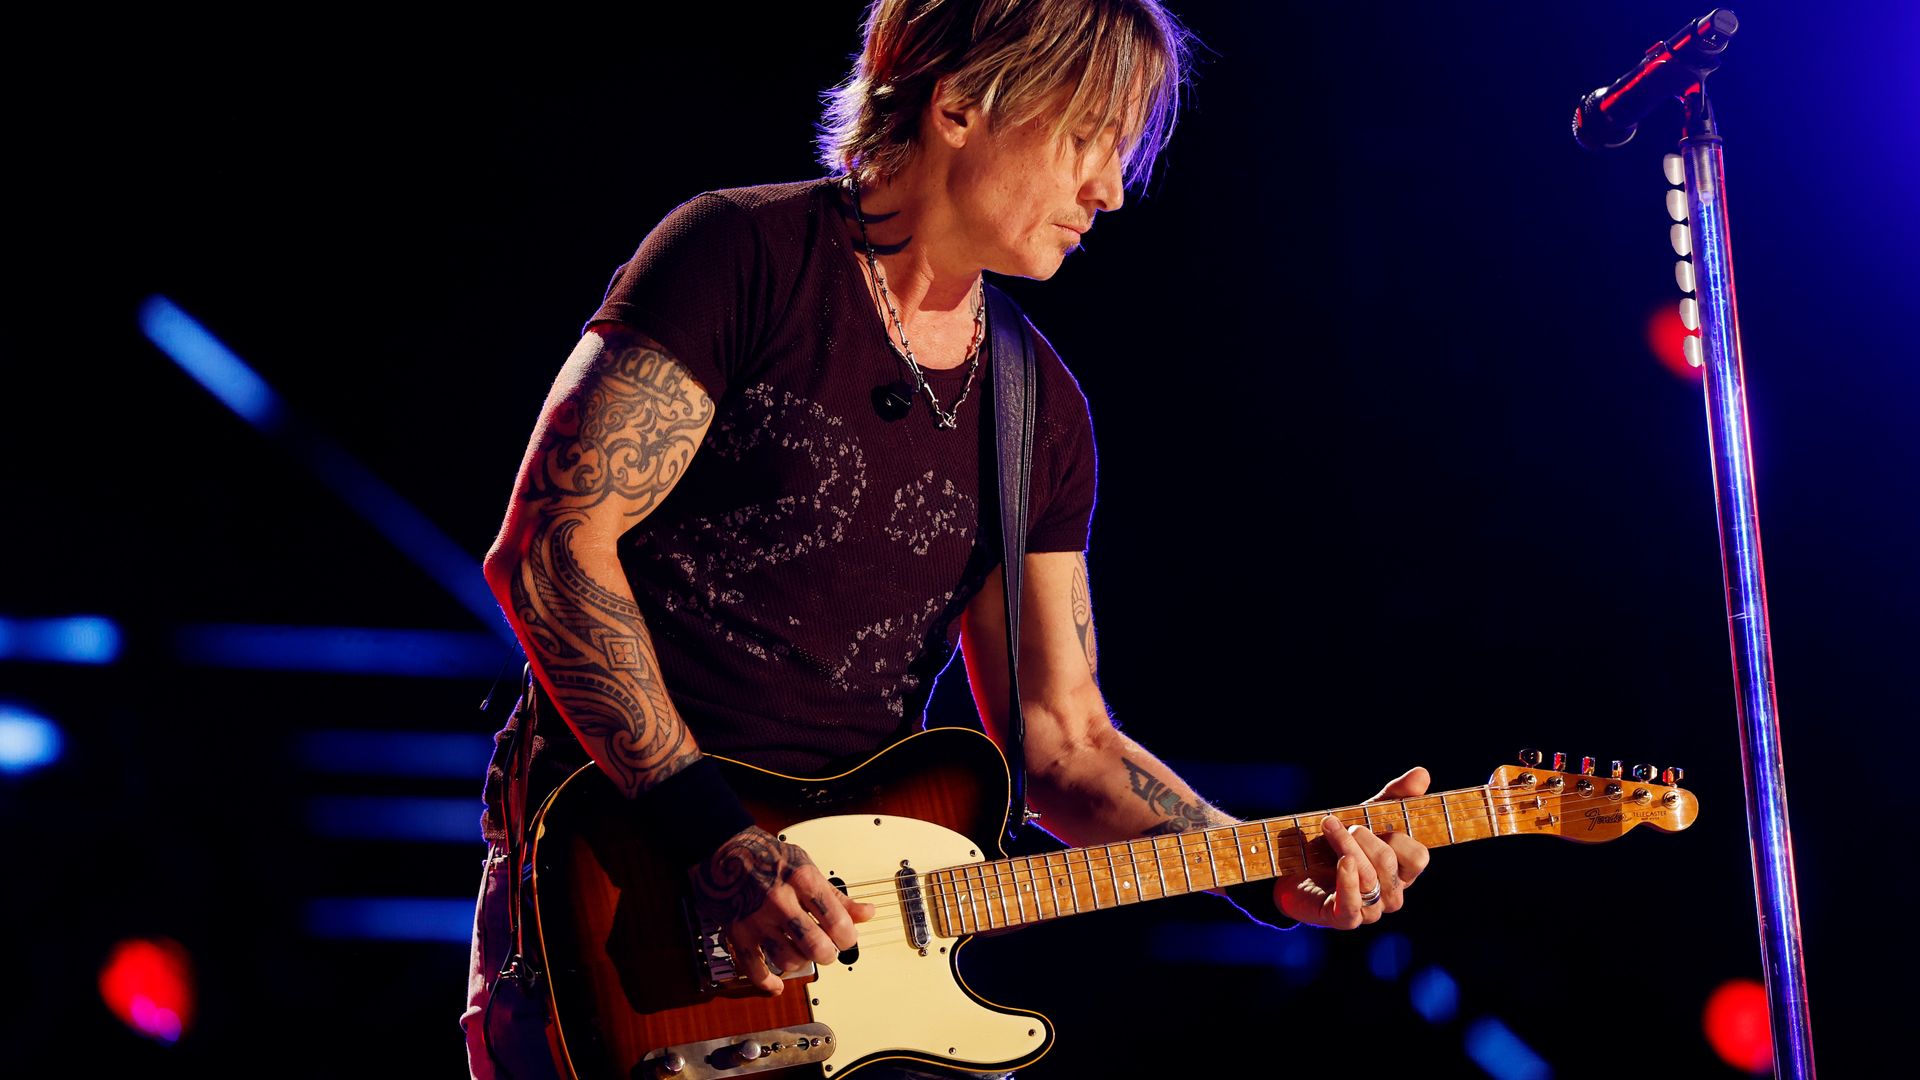 Keith Urban takes to the stage for surprise appearance and you won’t believe who with